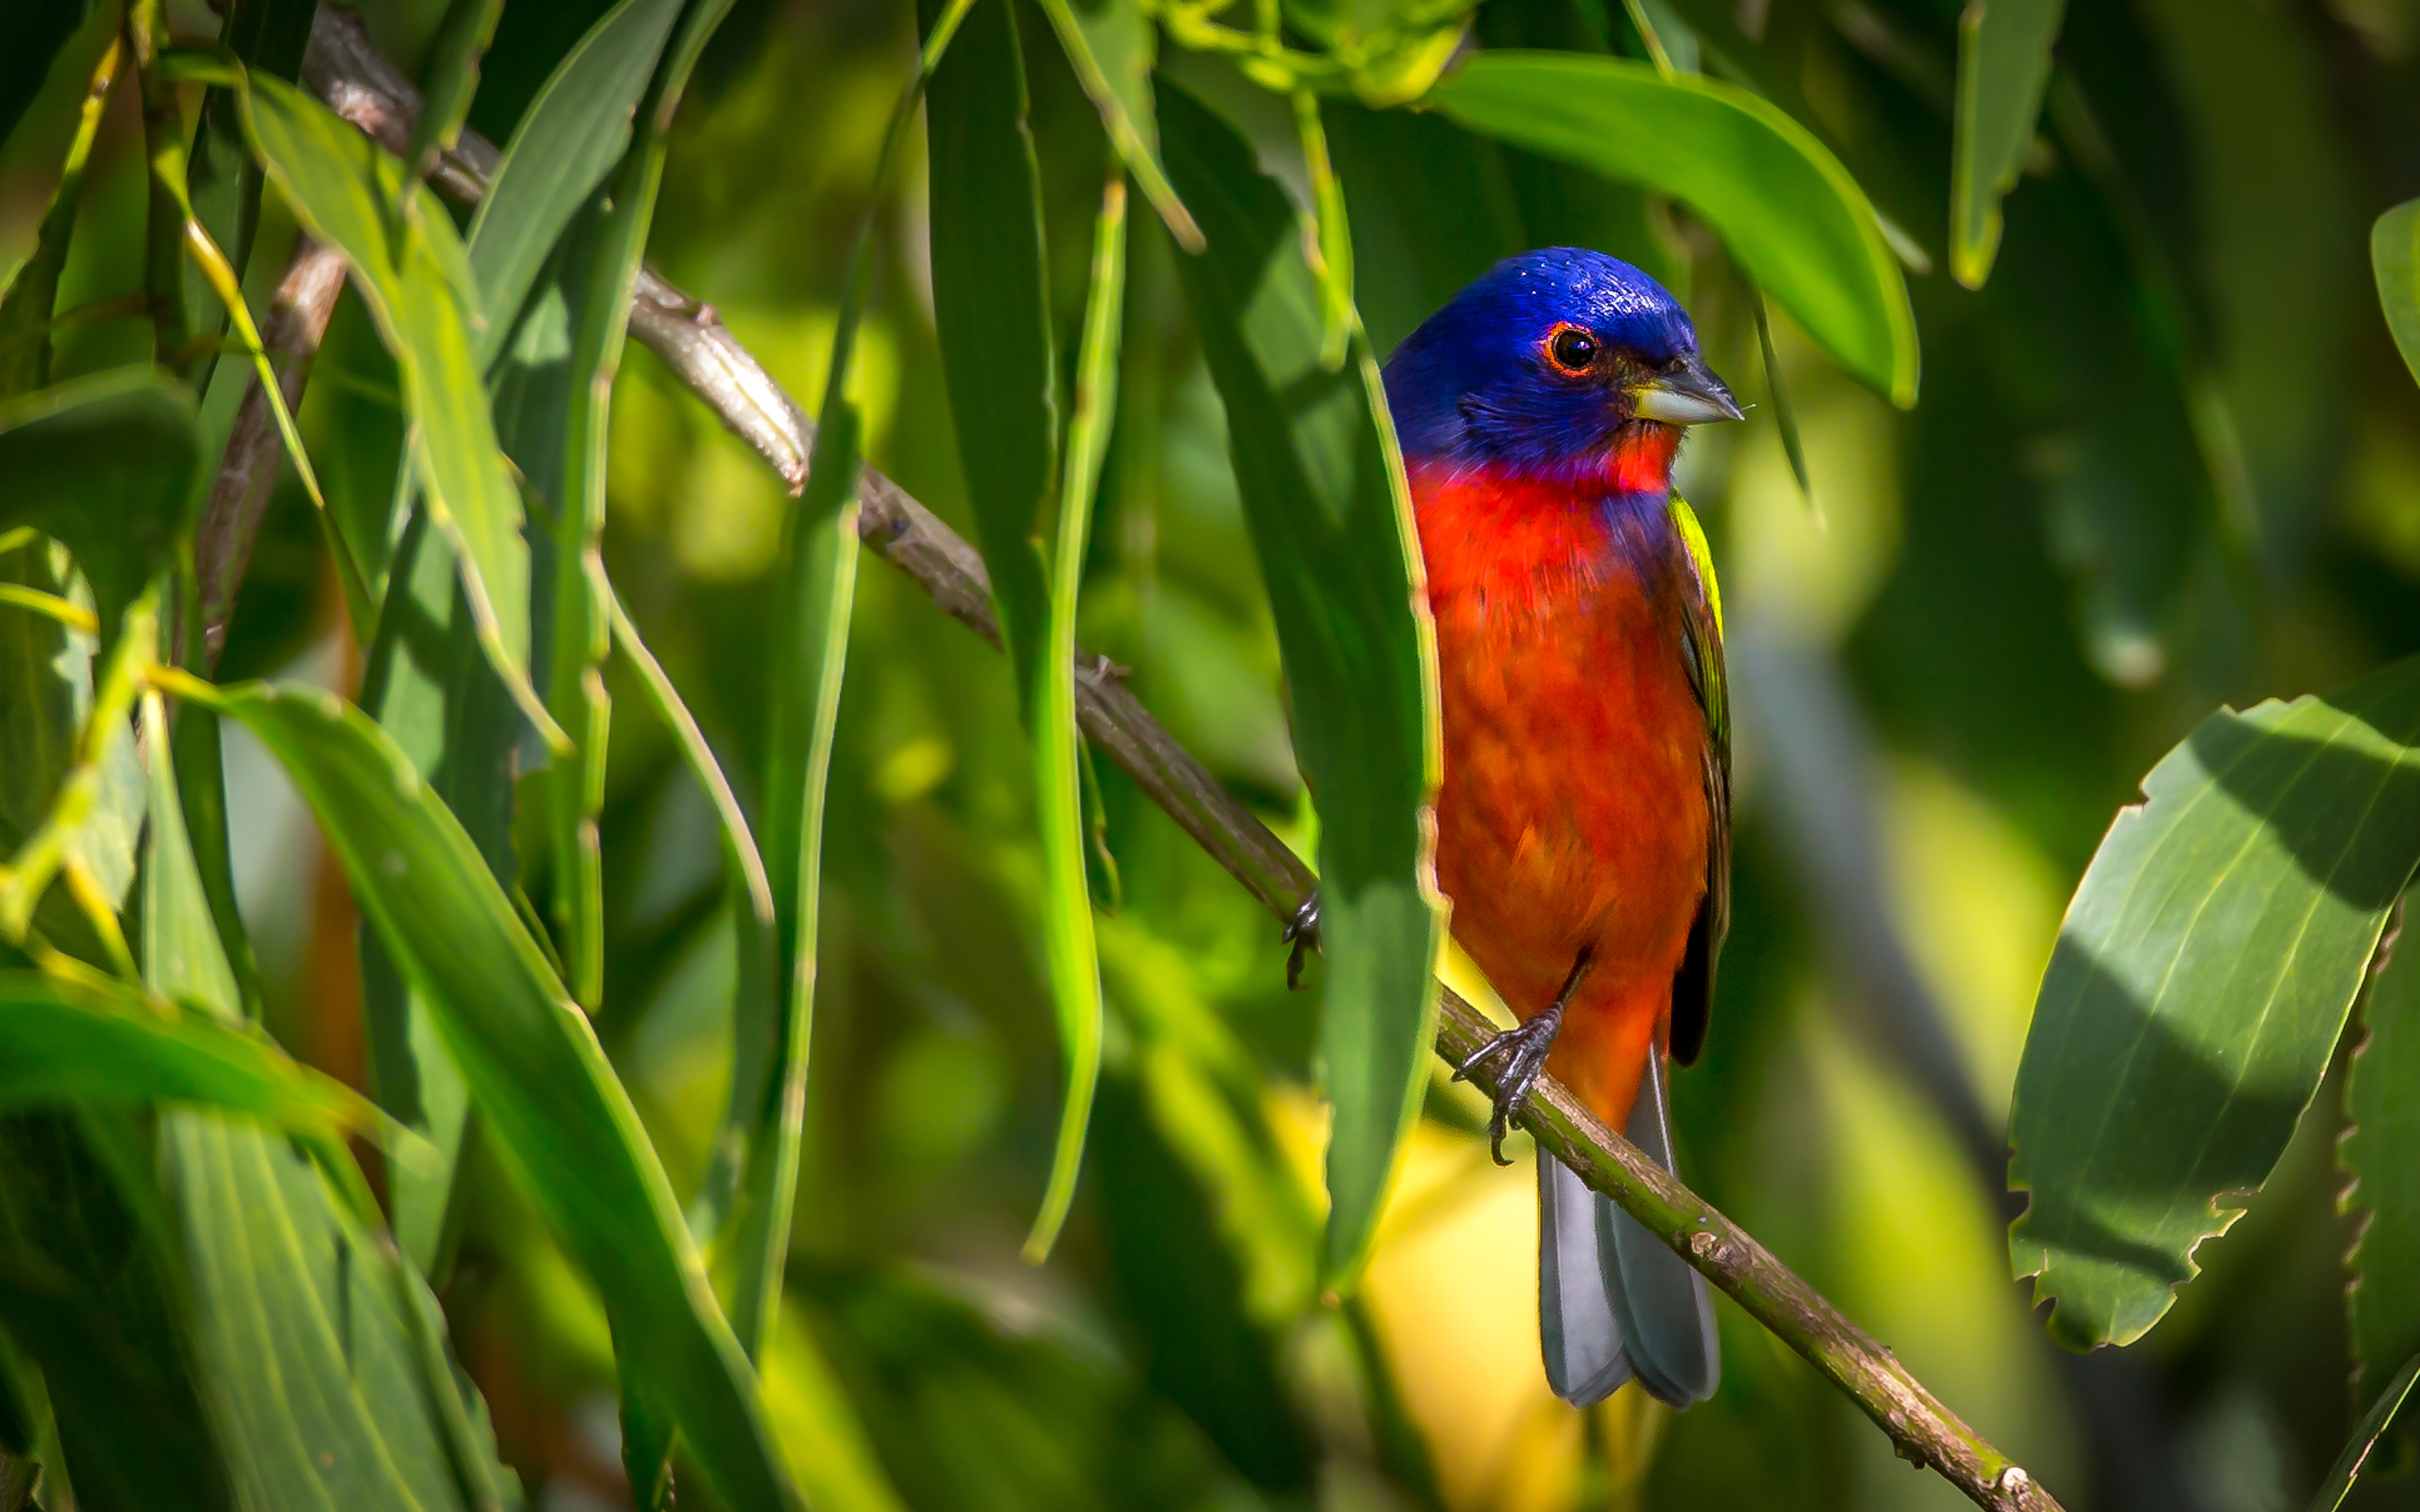 Painted Bunting 4k Ultra HD Wallpaper. Background Image